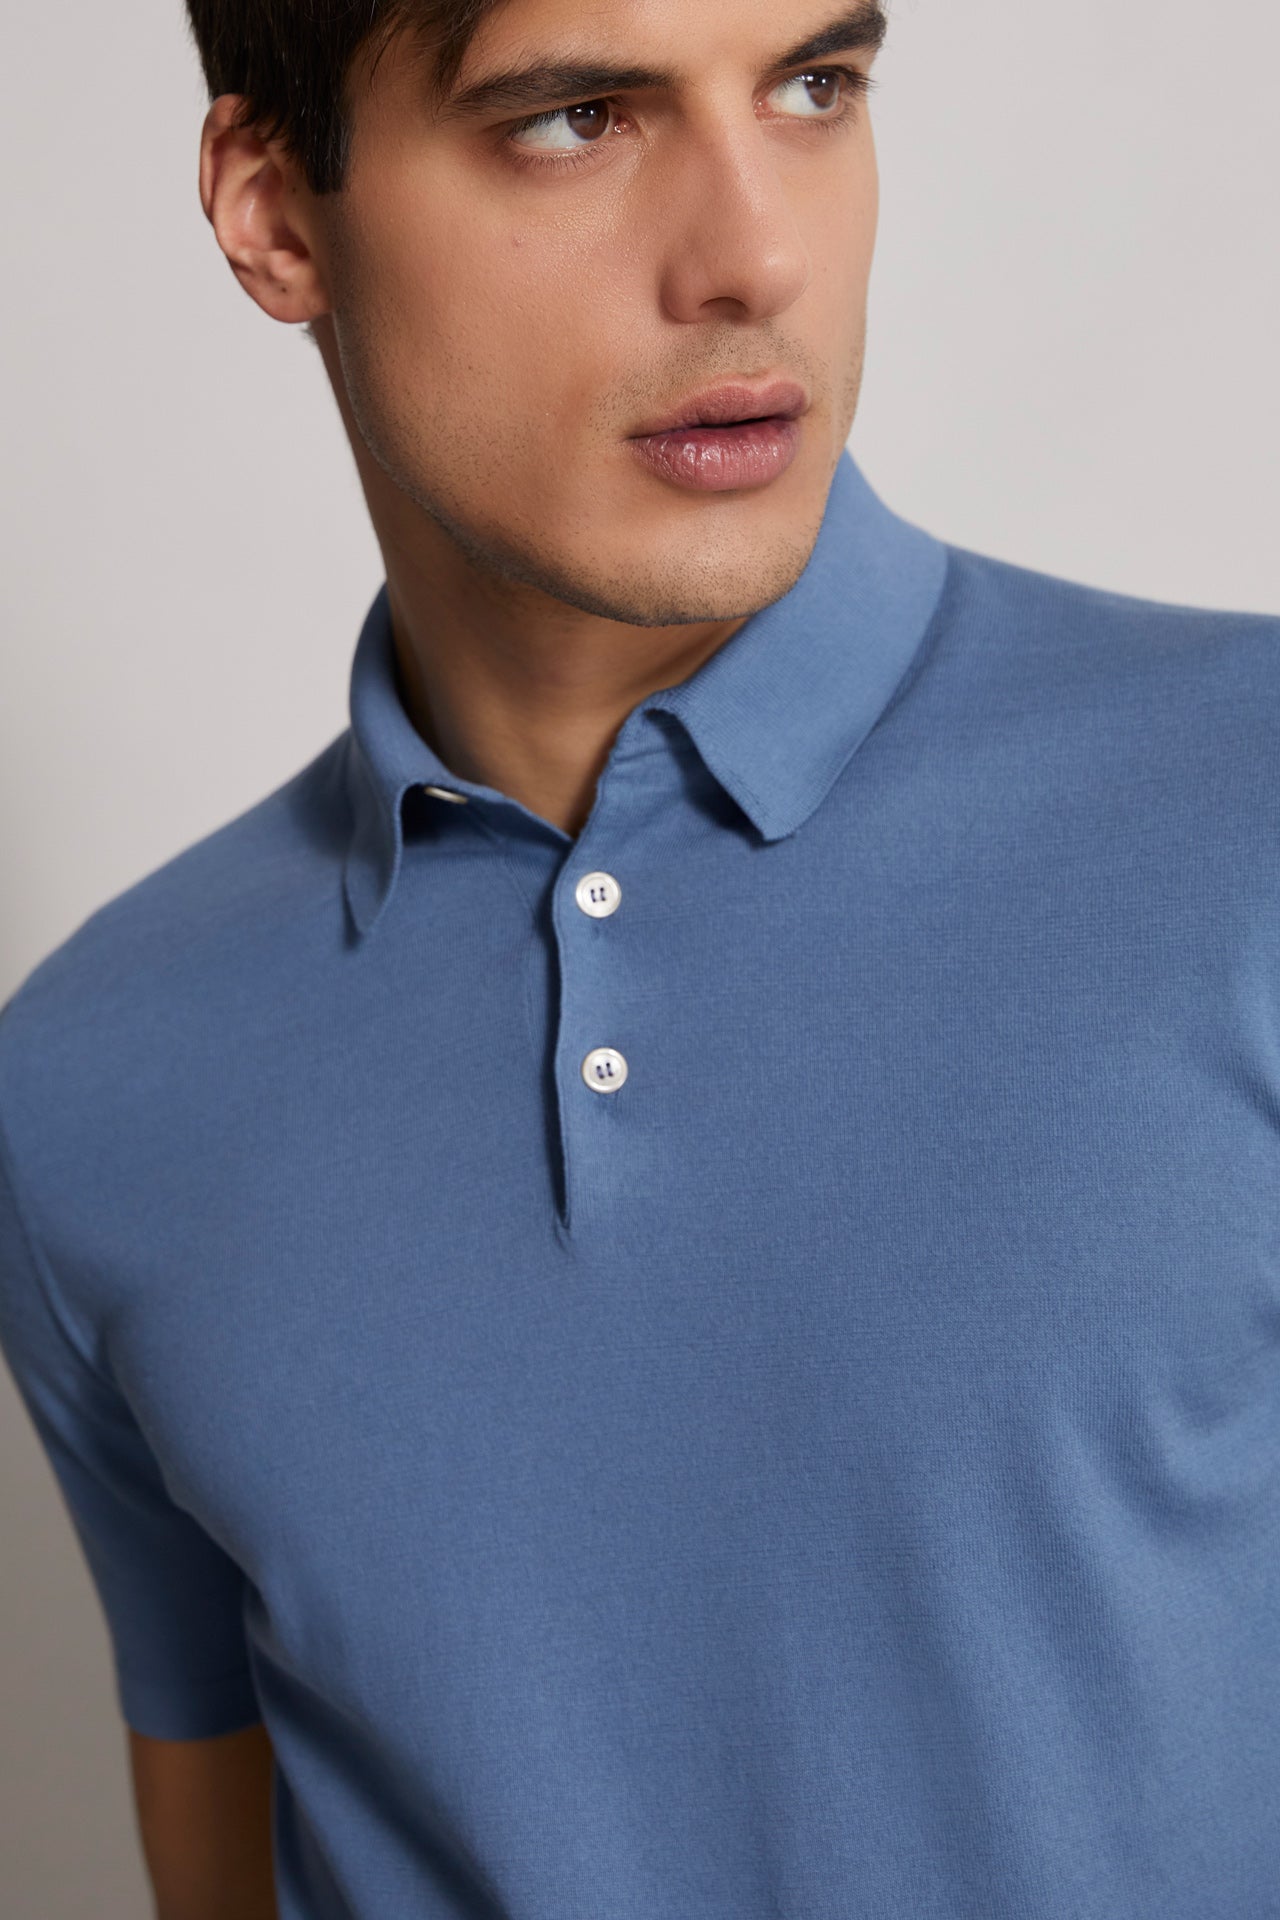 Successo: Men's knitted Giza Cotton Polo T-Shirt in light blue - collar detail